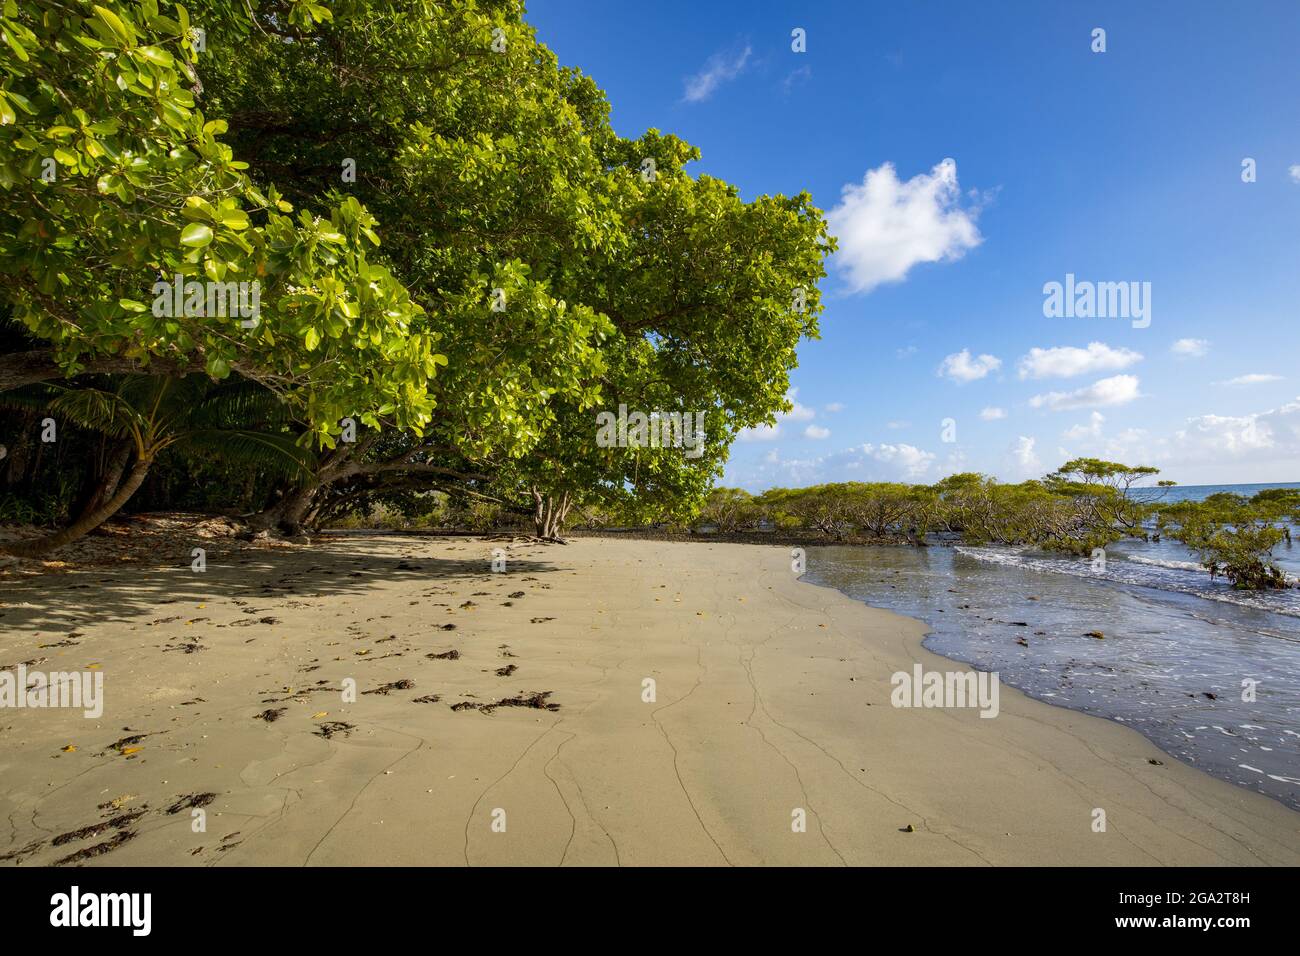 Close-up of a sandy beach with mangrove trees lining the shoreline at Cape Tribulation, where the Daintree Rainforest meets the Coral Sea on the Pa... Stock Photo